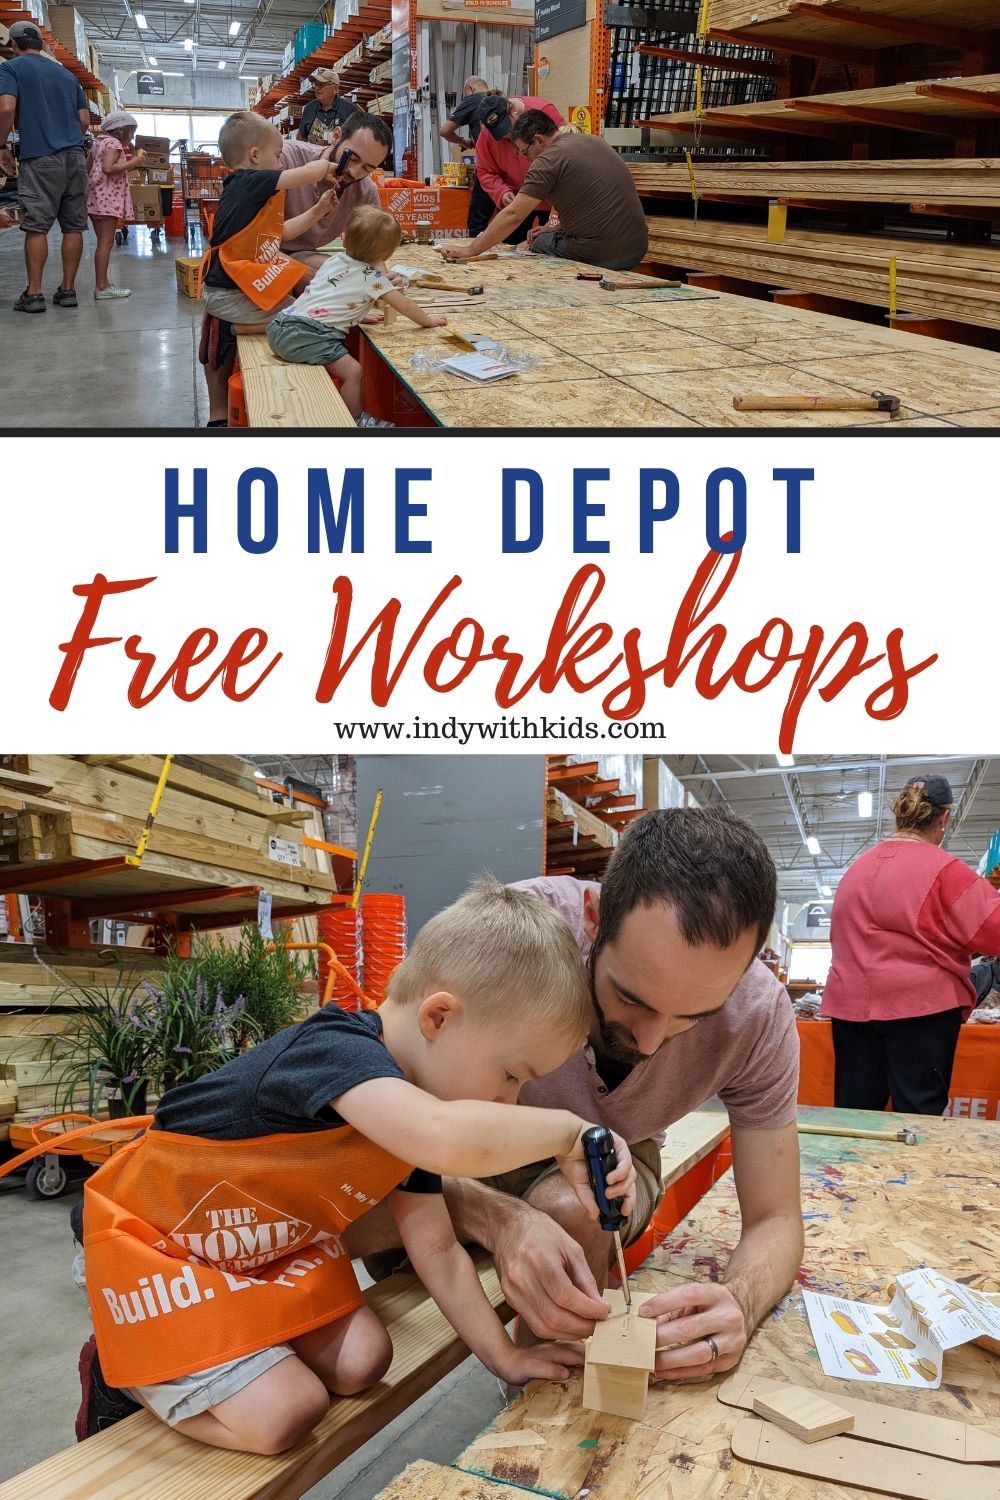 Kids Projects & Activities at The Home Depot